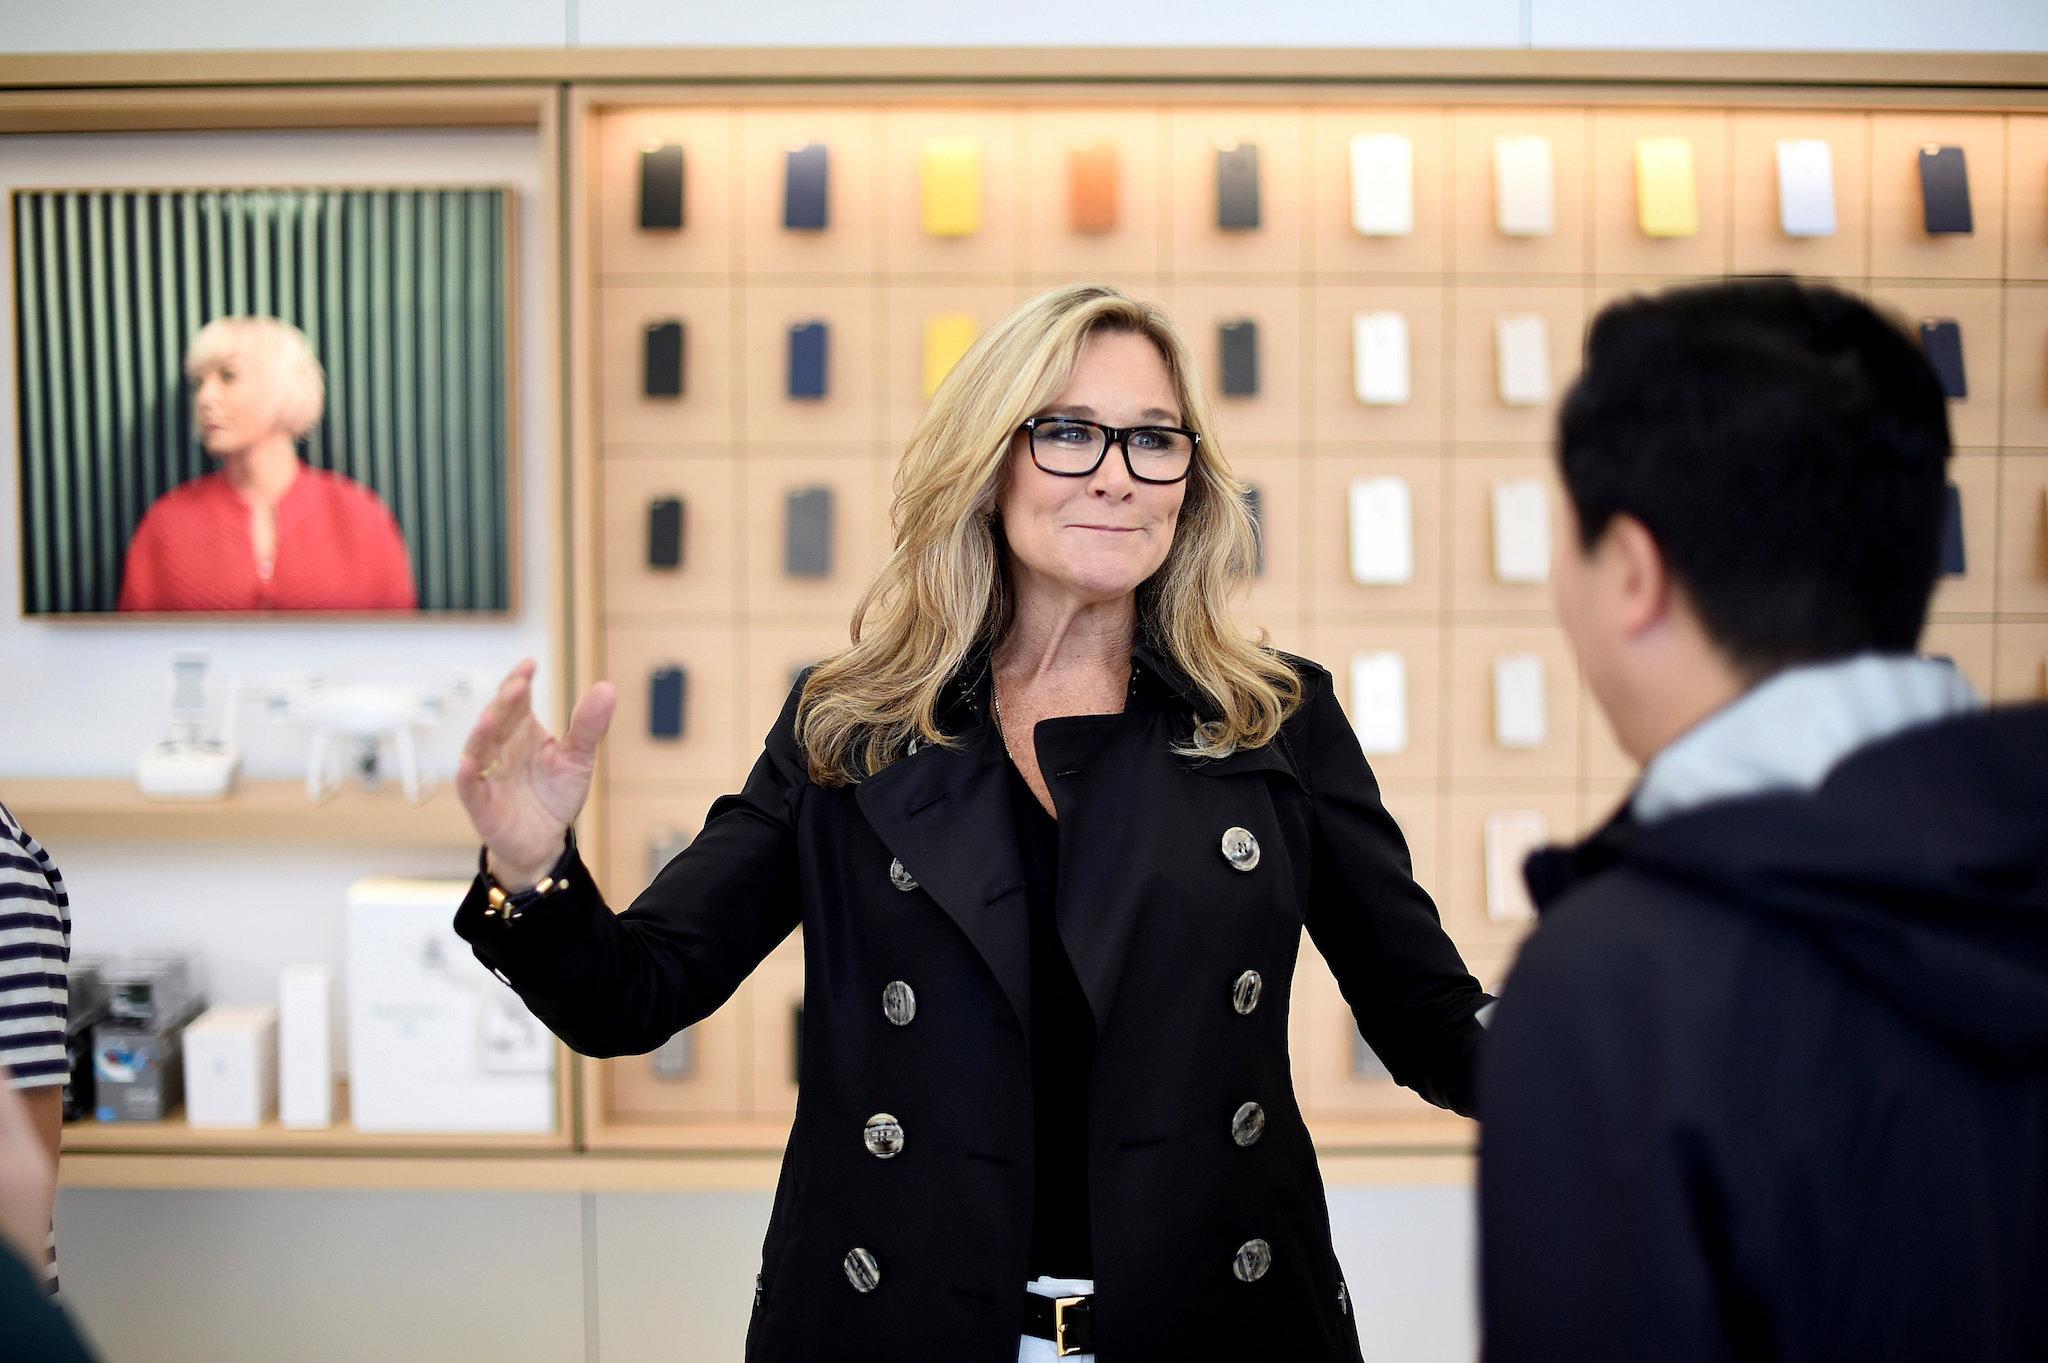 Angela Ahrendts, Apple Inc. senior vice president of retail and online stores, speaks with a worker at Apple's new retail store during a media preview in San Francisco, California